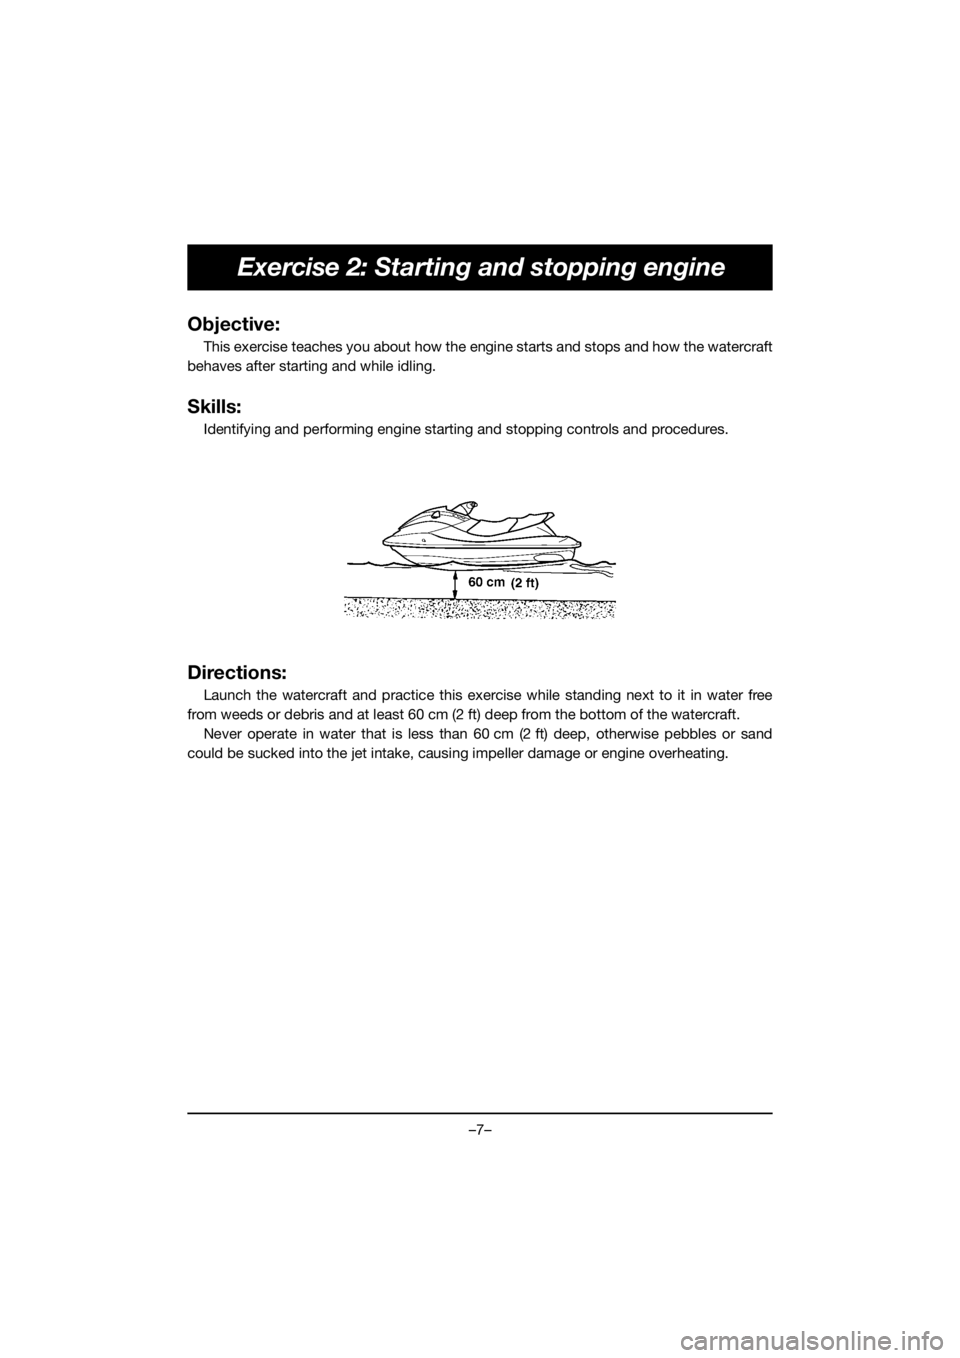 YAMAHA EX SPORT 2019  Manuale de Empleo (in Spanish) –7–
Exercise 2: Starting and stopping engine
Objective:
This exercise teaches you about how the engine starts and stops and how the watercraft
behaves after starting and while idling.
Skills:
Iden